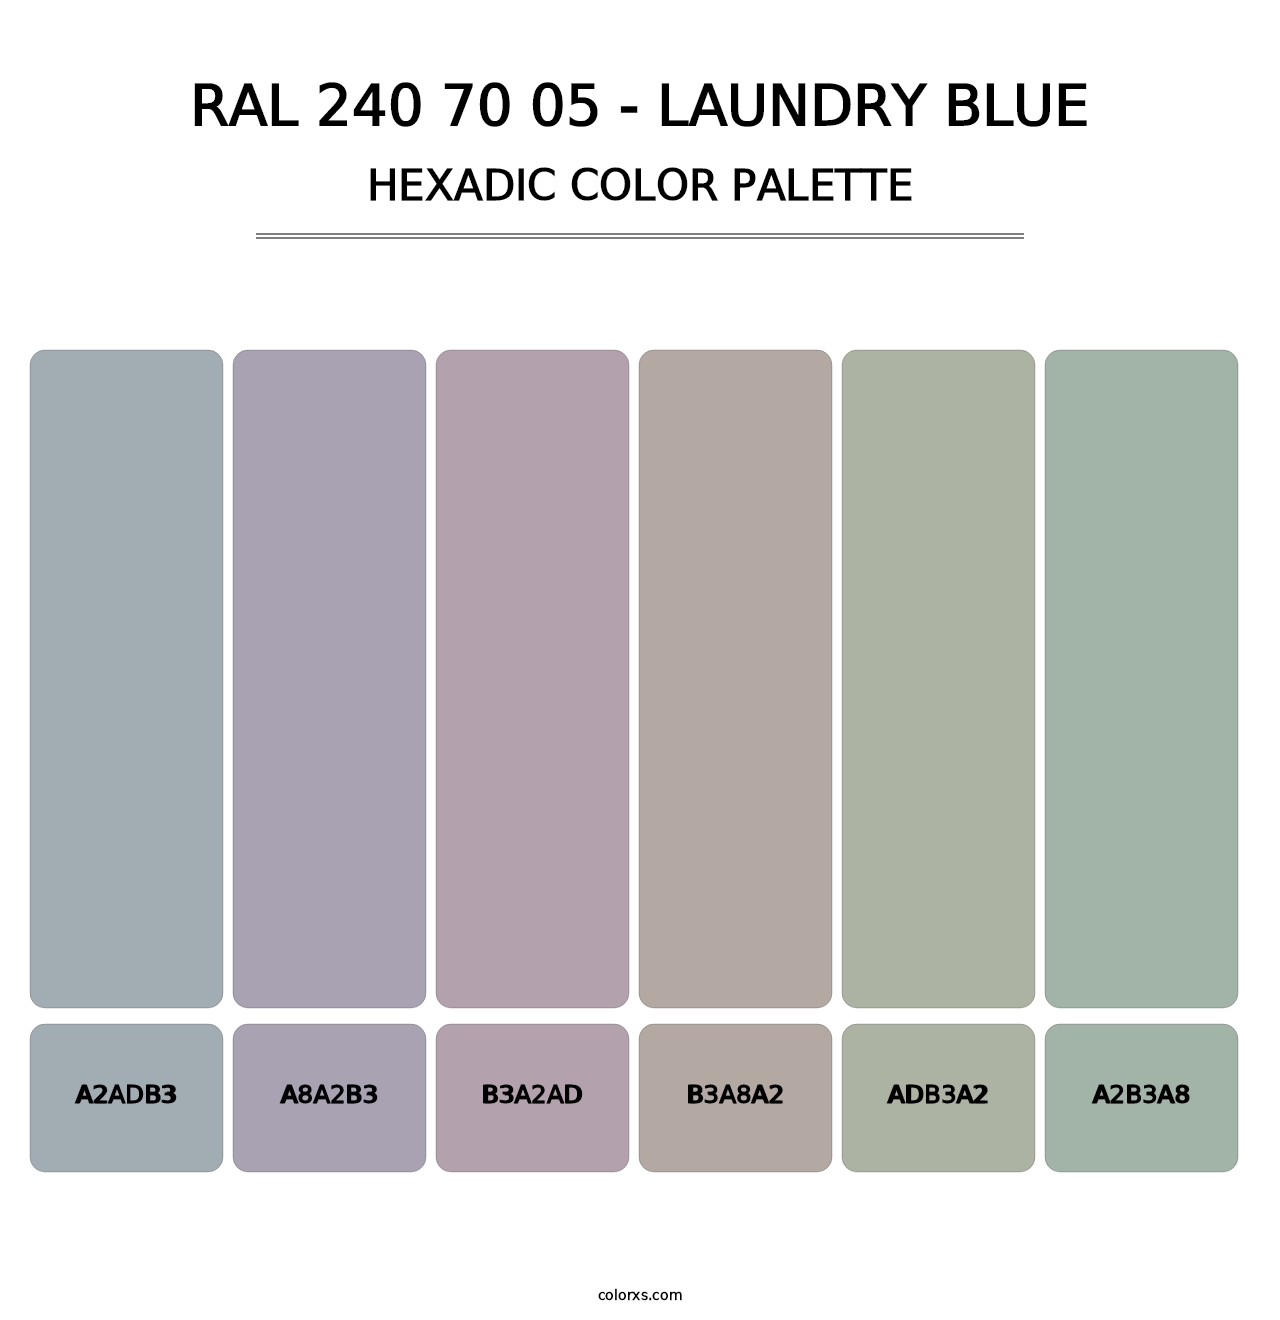 RAL 240 70 05 - Laundry Blue - Hexadic Color Palette